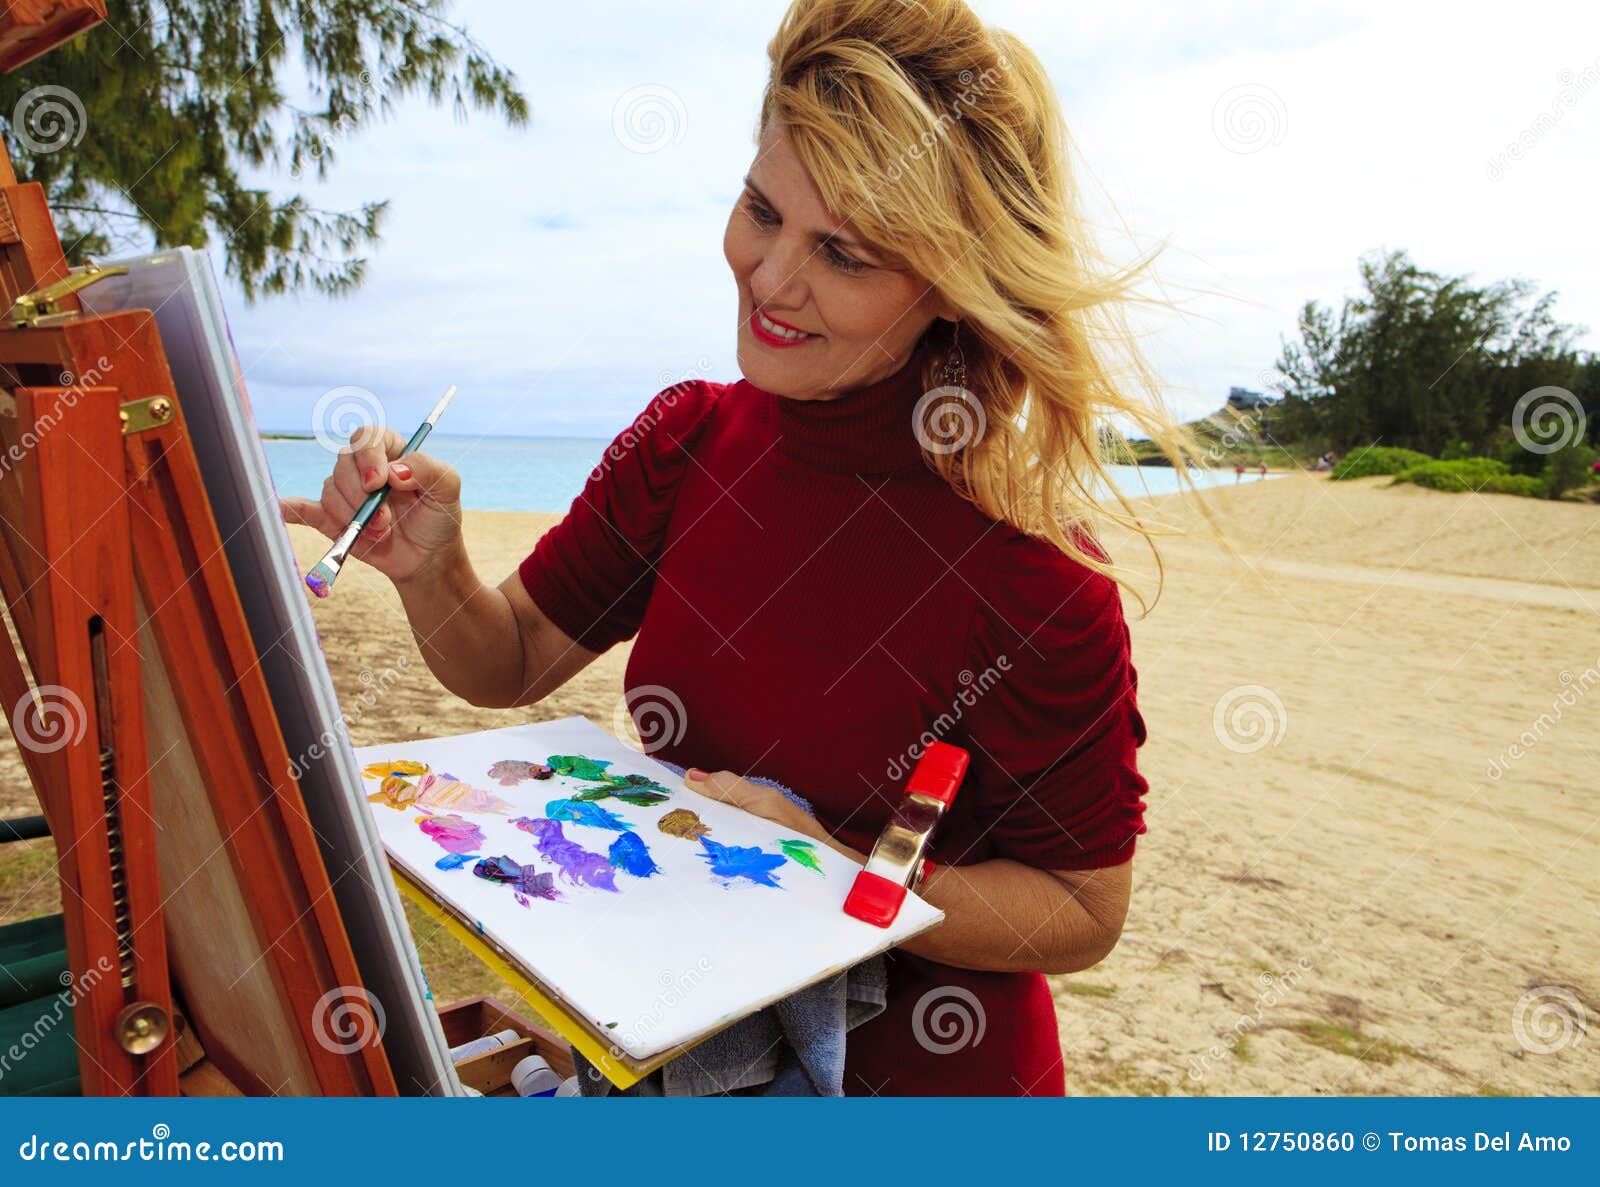 female artist painting outdoors